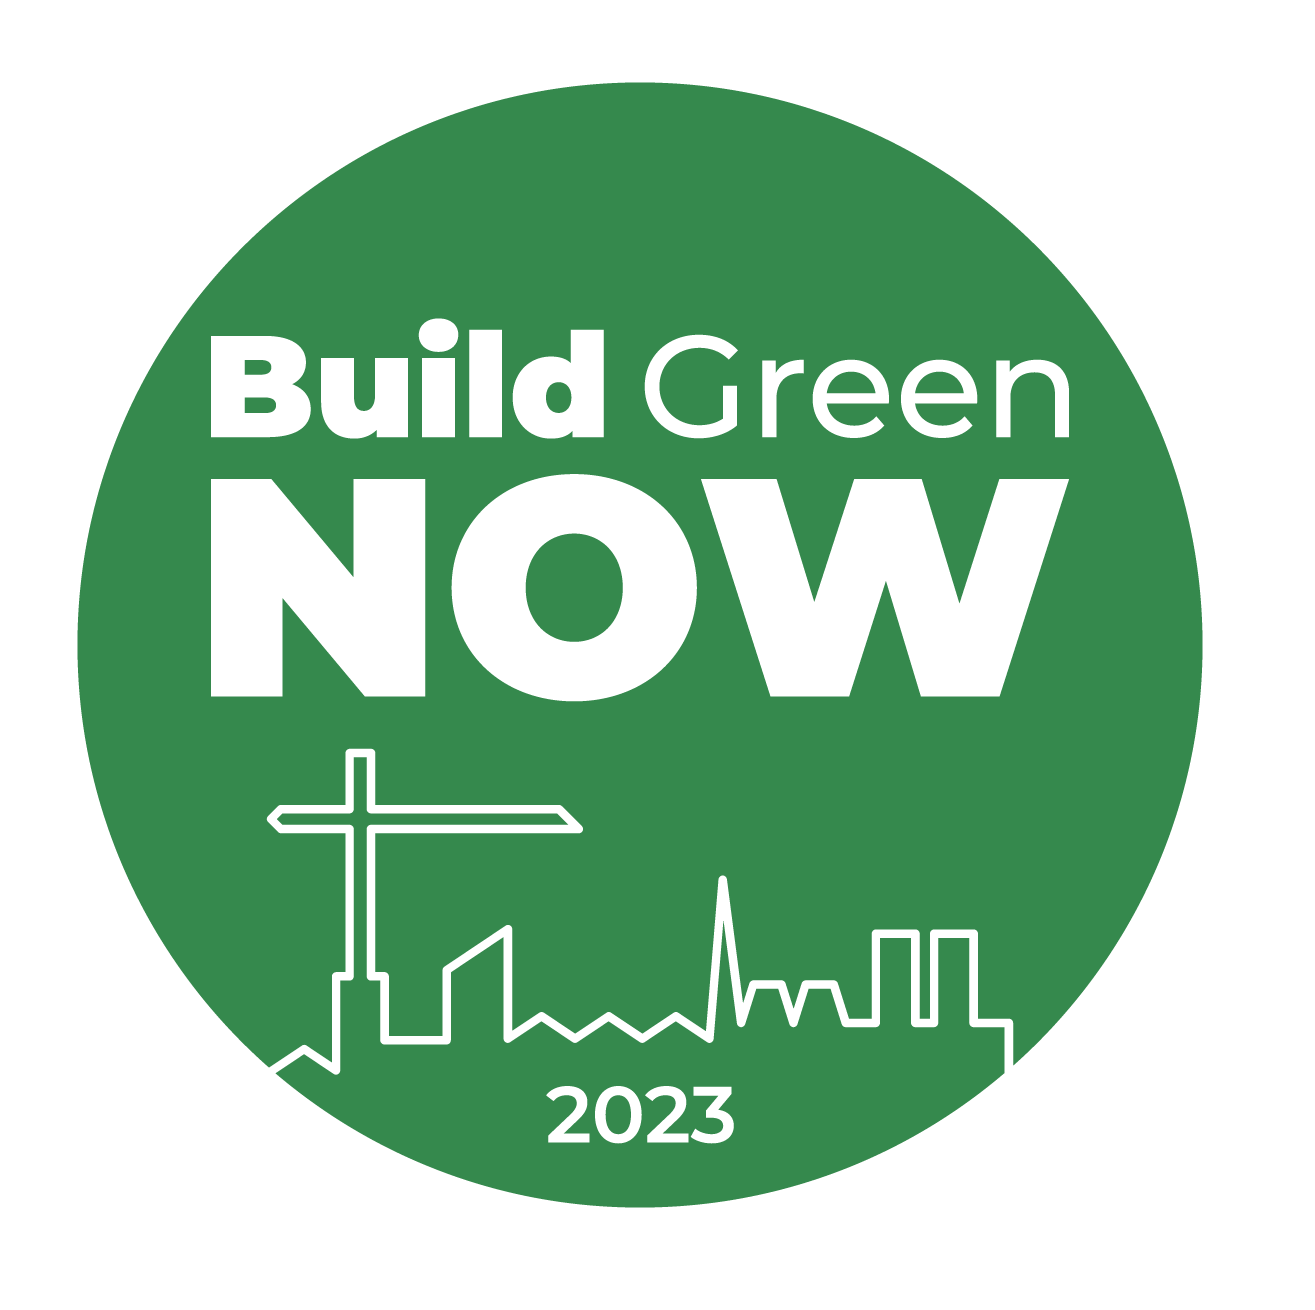 Build Green Now 2023